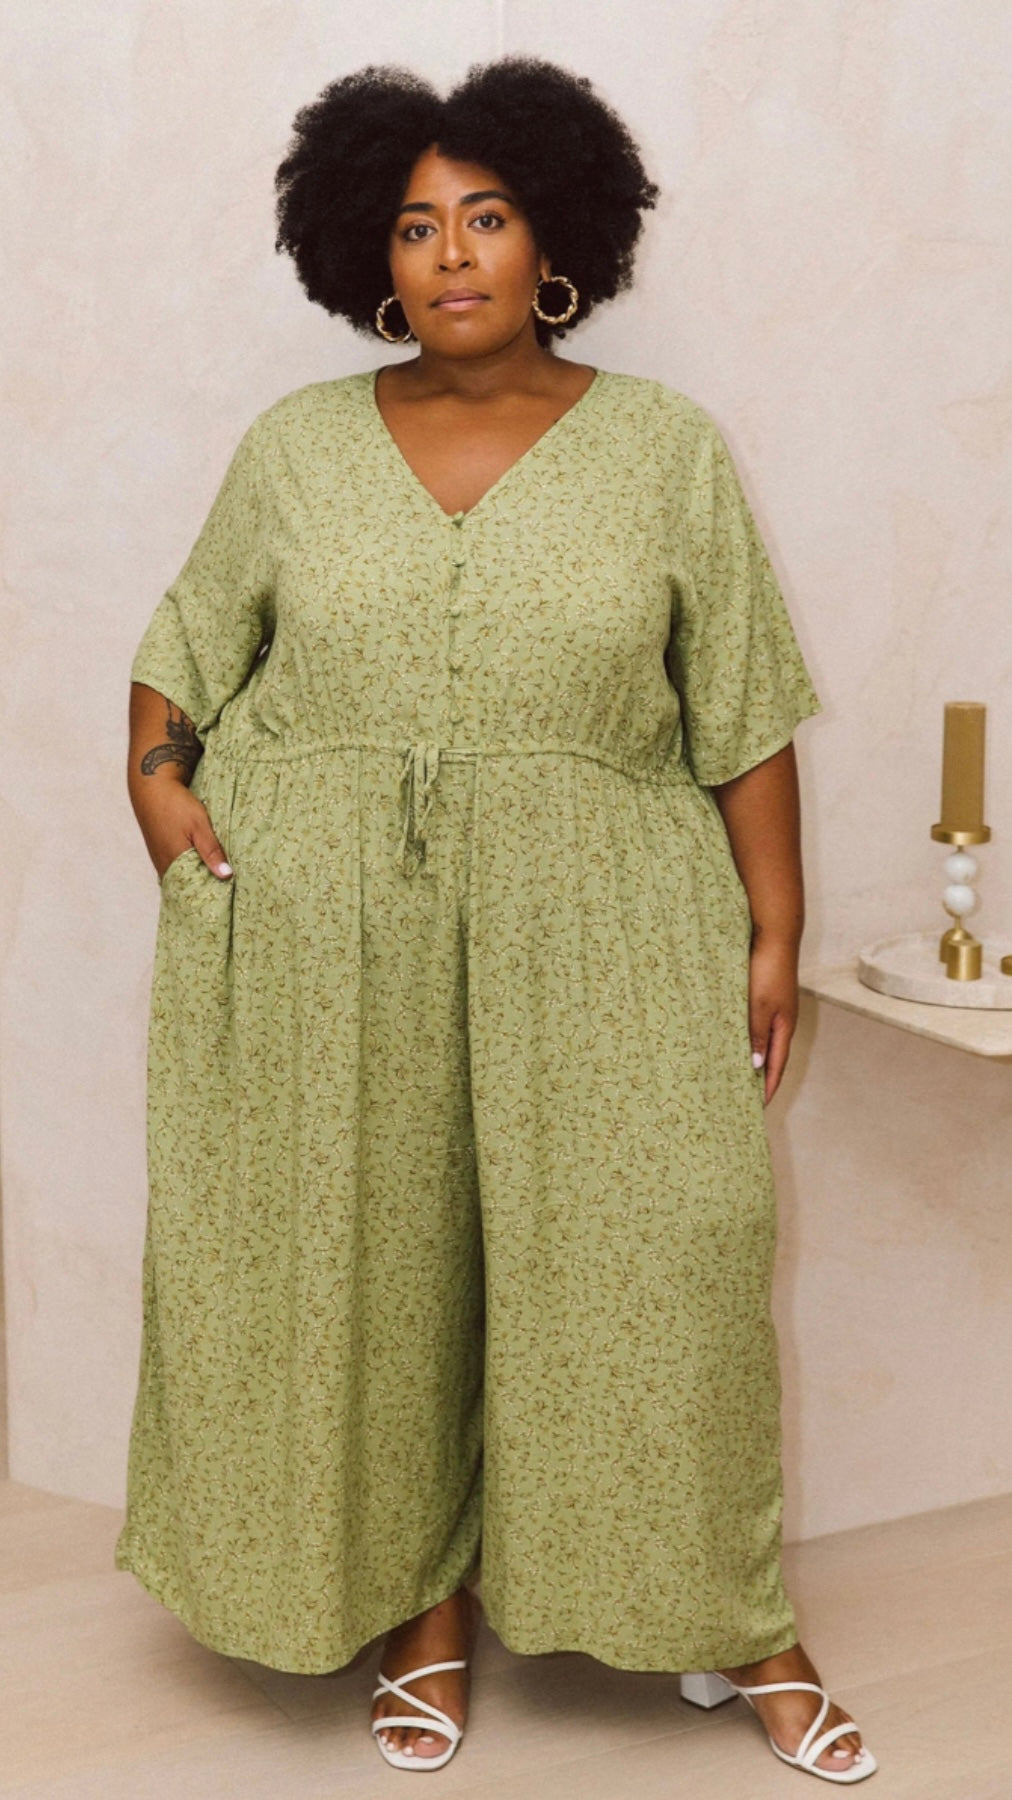 Morgan Jumpsuit - Green Wildflower | Peach the Label | Super fun, super floaty and creates an instant one-item outfit! We love how easy to wear this jumpsuit is with its versatile fit - cinch it in as much or as little a